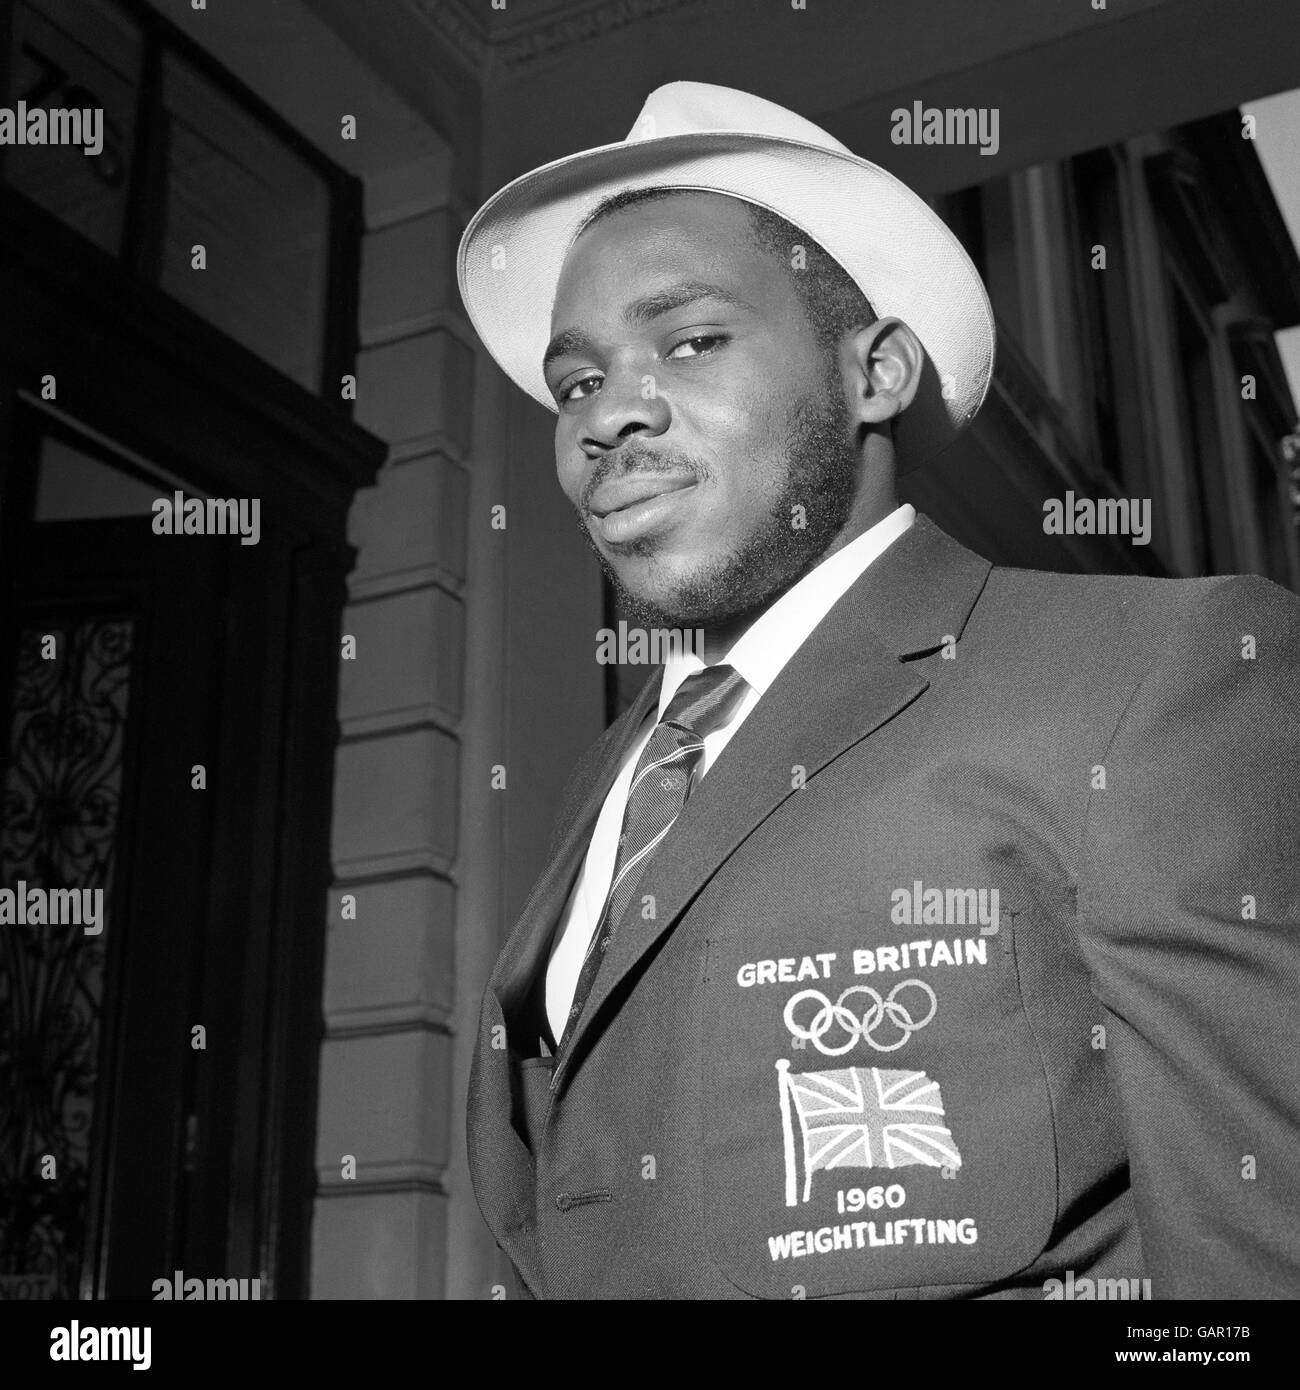 Weightlifter Louis Martin before leaving London for the Rome Olympic Games. He won a bronze medal in the Middle-heavyweight class. Stock Photo